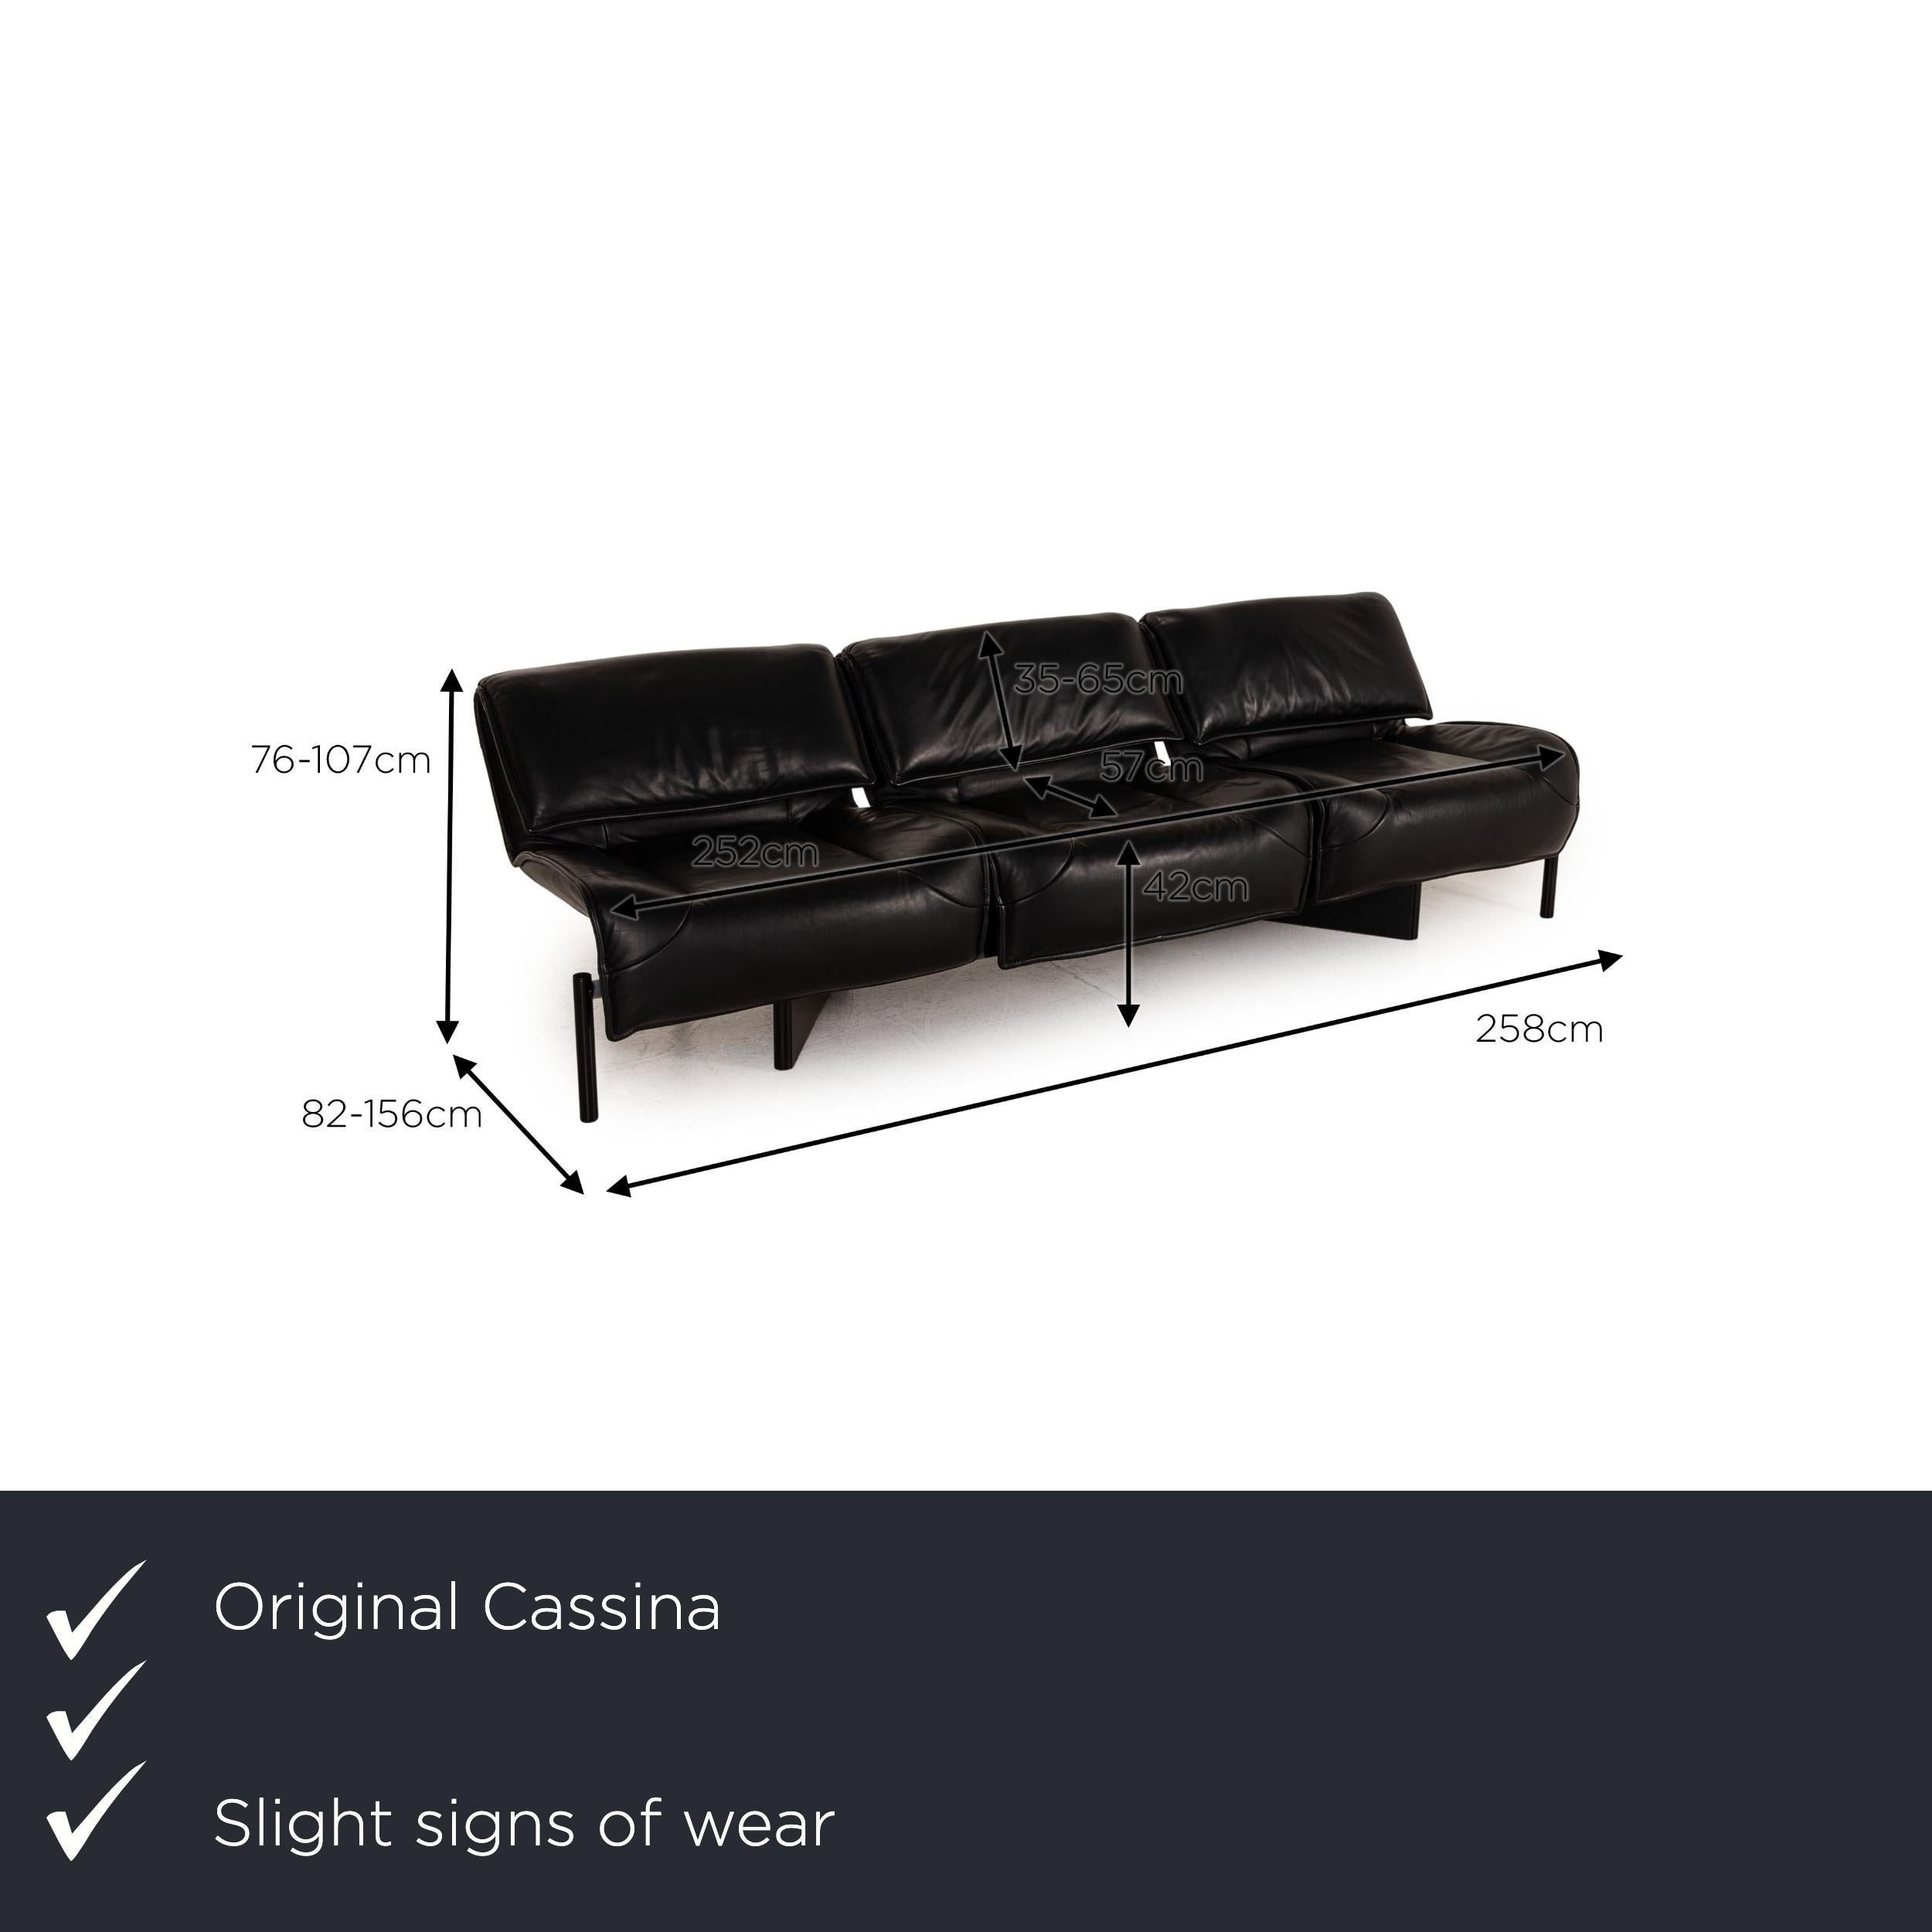 We present to you a Cassina Veranda leather sofa black three-seater couch function.

Product measurements in centimeters:

depth: 82
width: 258
height: 76
seat height: 42
seat depth: 57
seat width: 252
back height: 35.


 